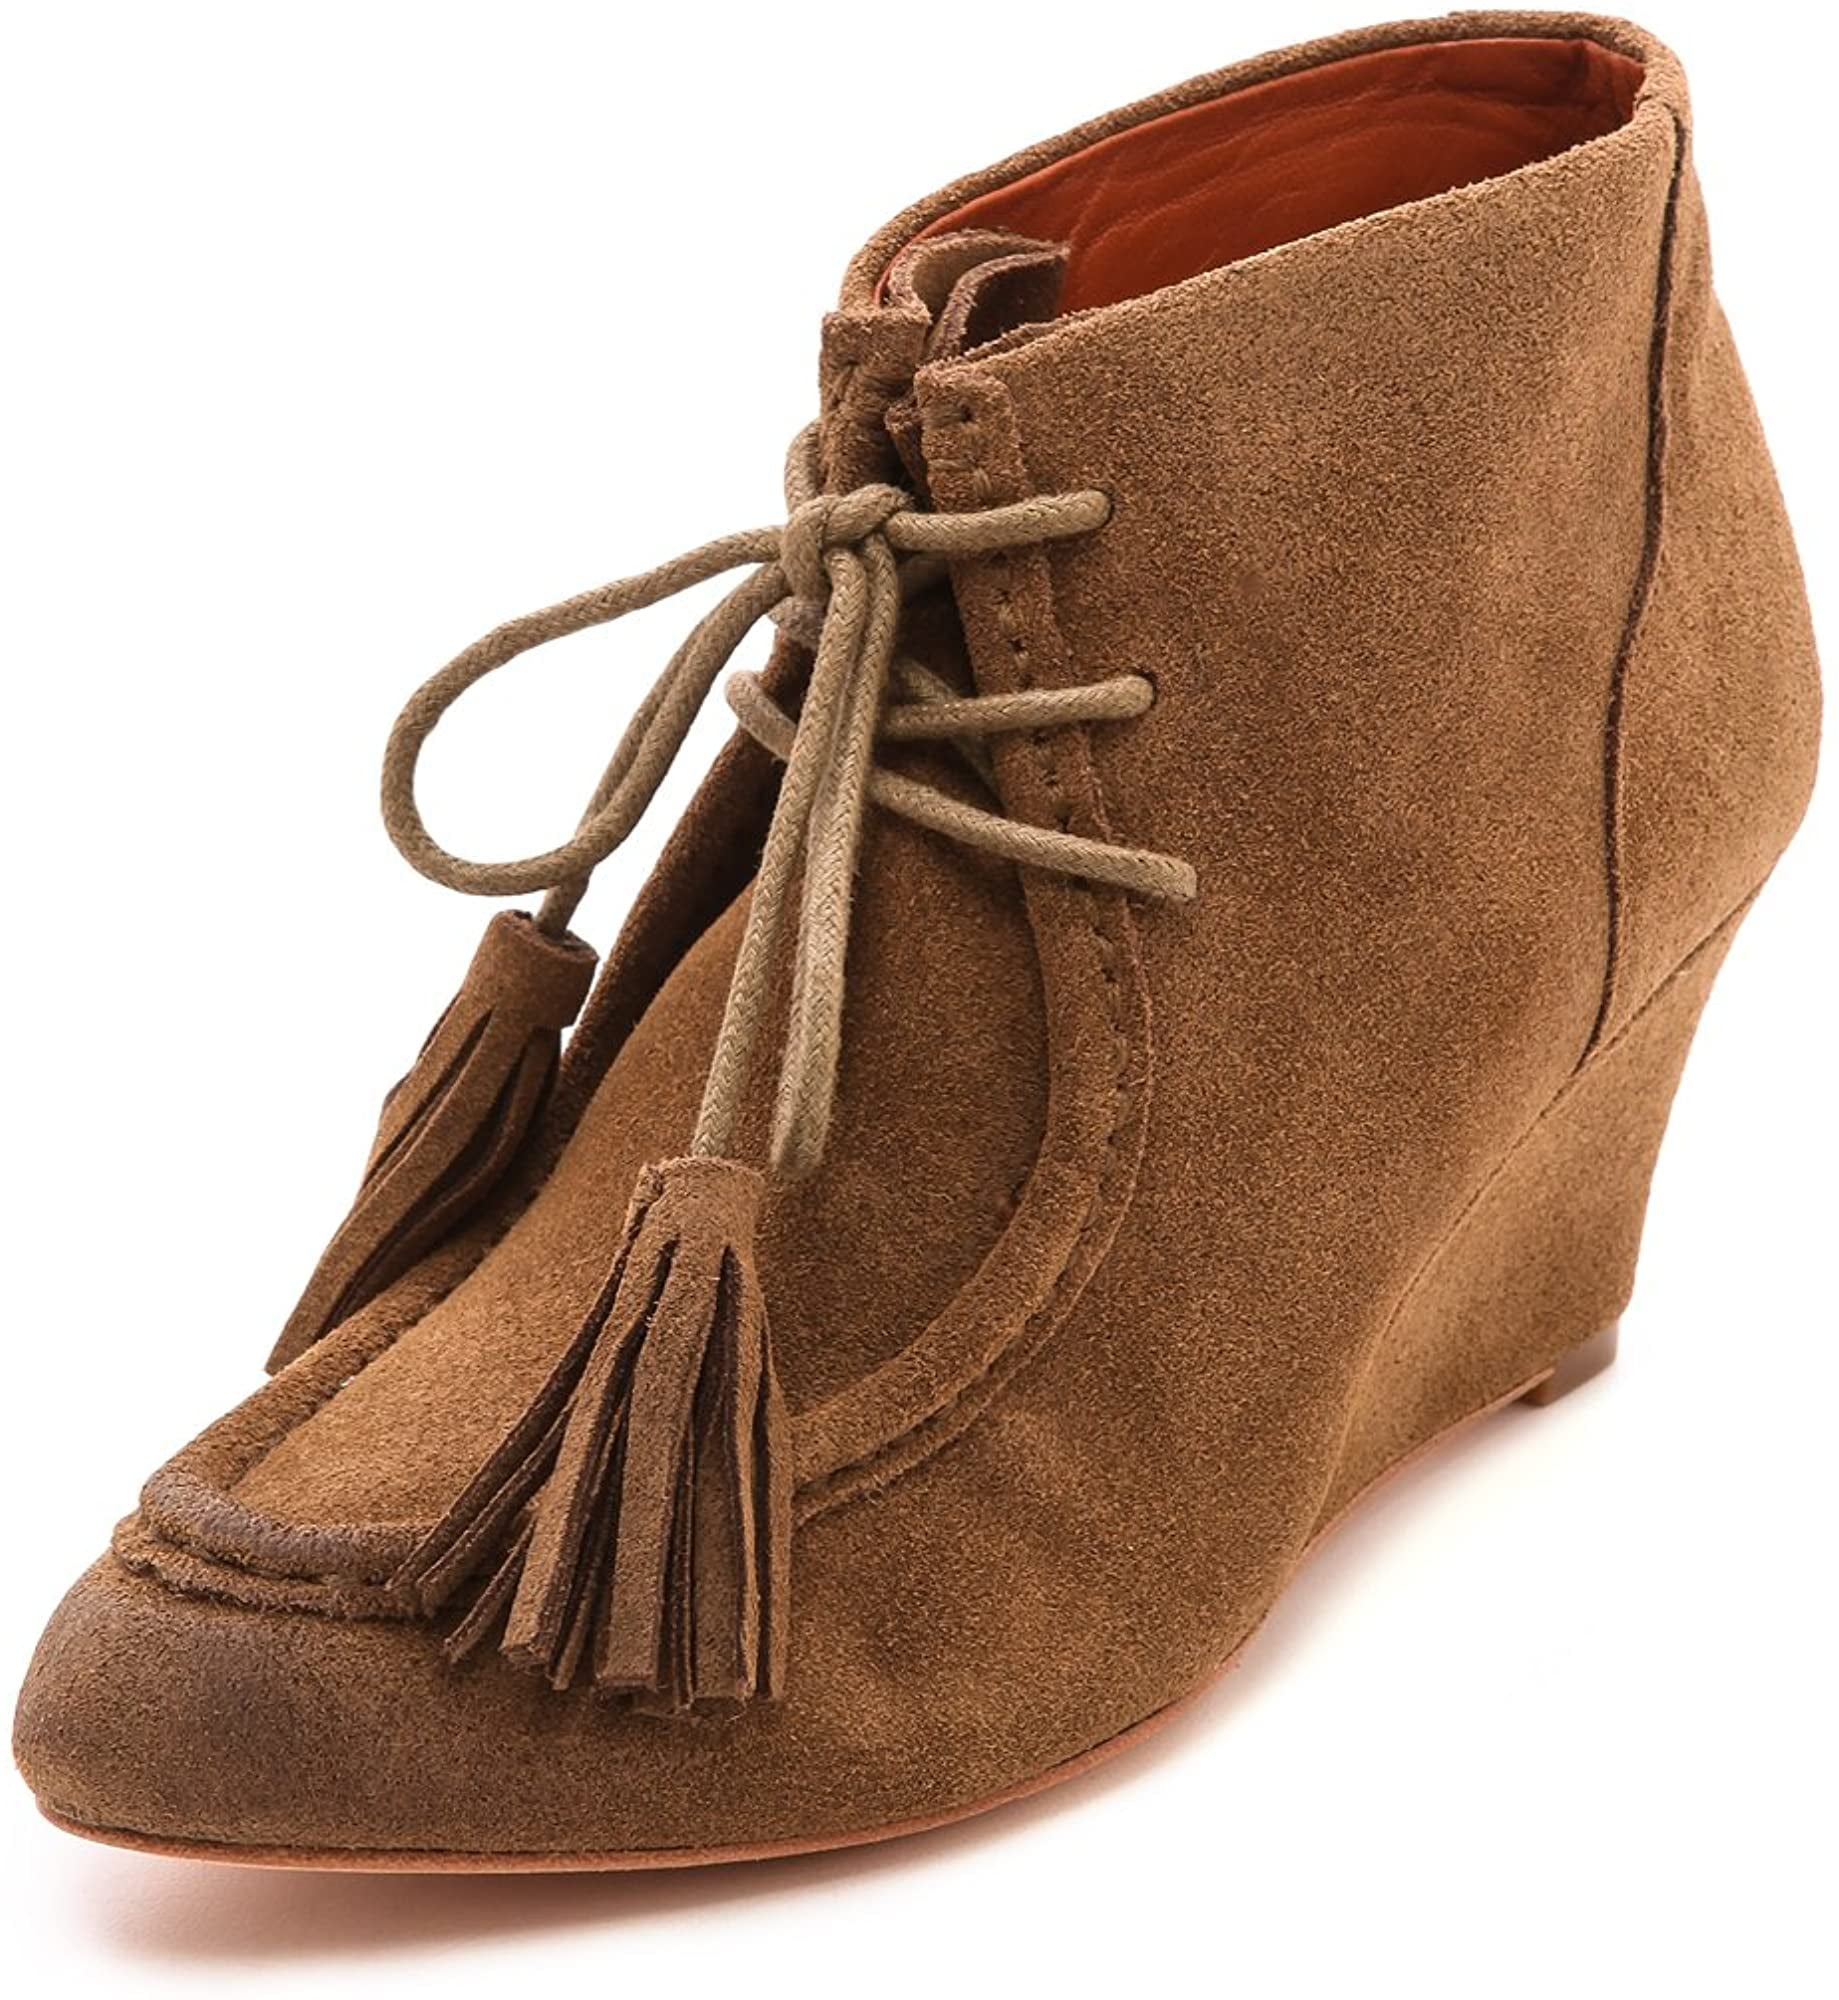 Rebecca Minkoff Womens Mia Lace Up Wedge Booties 